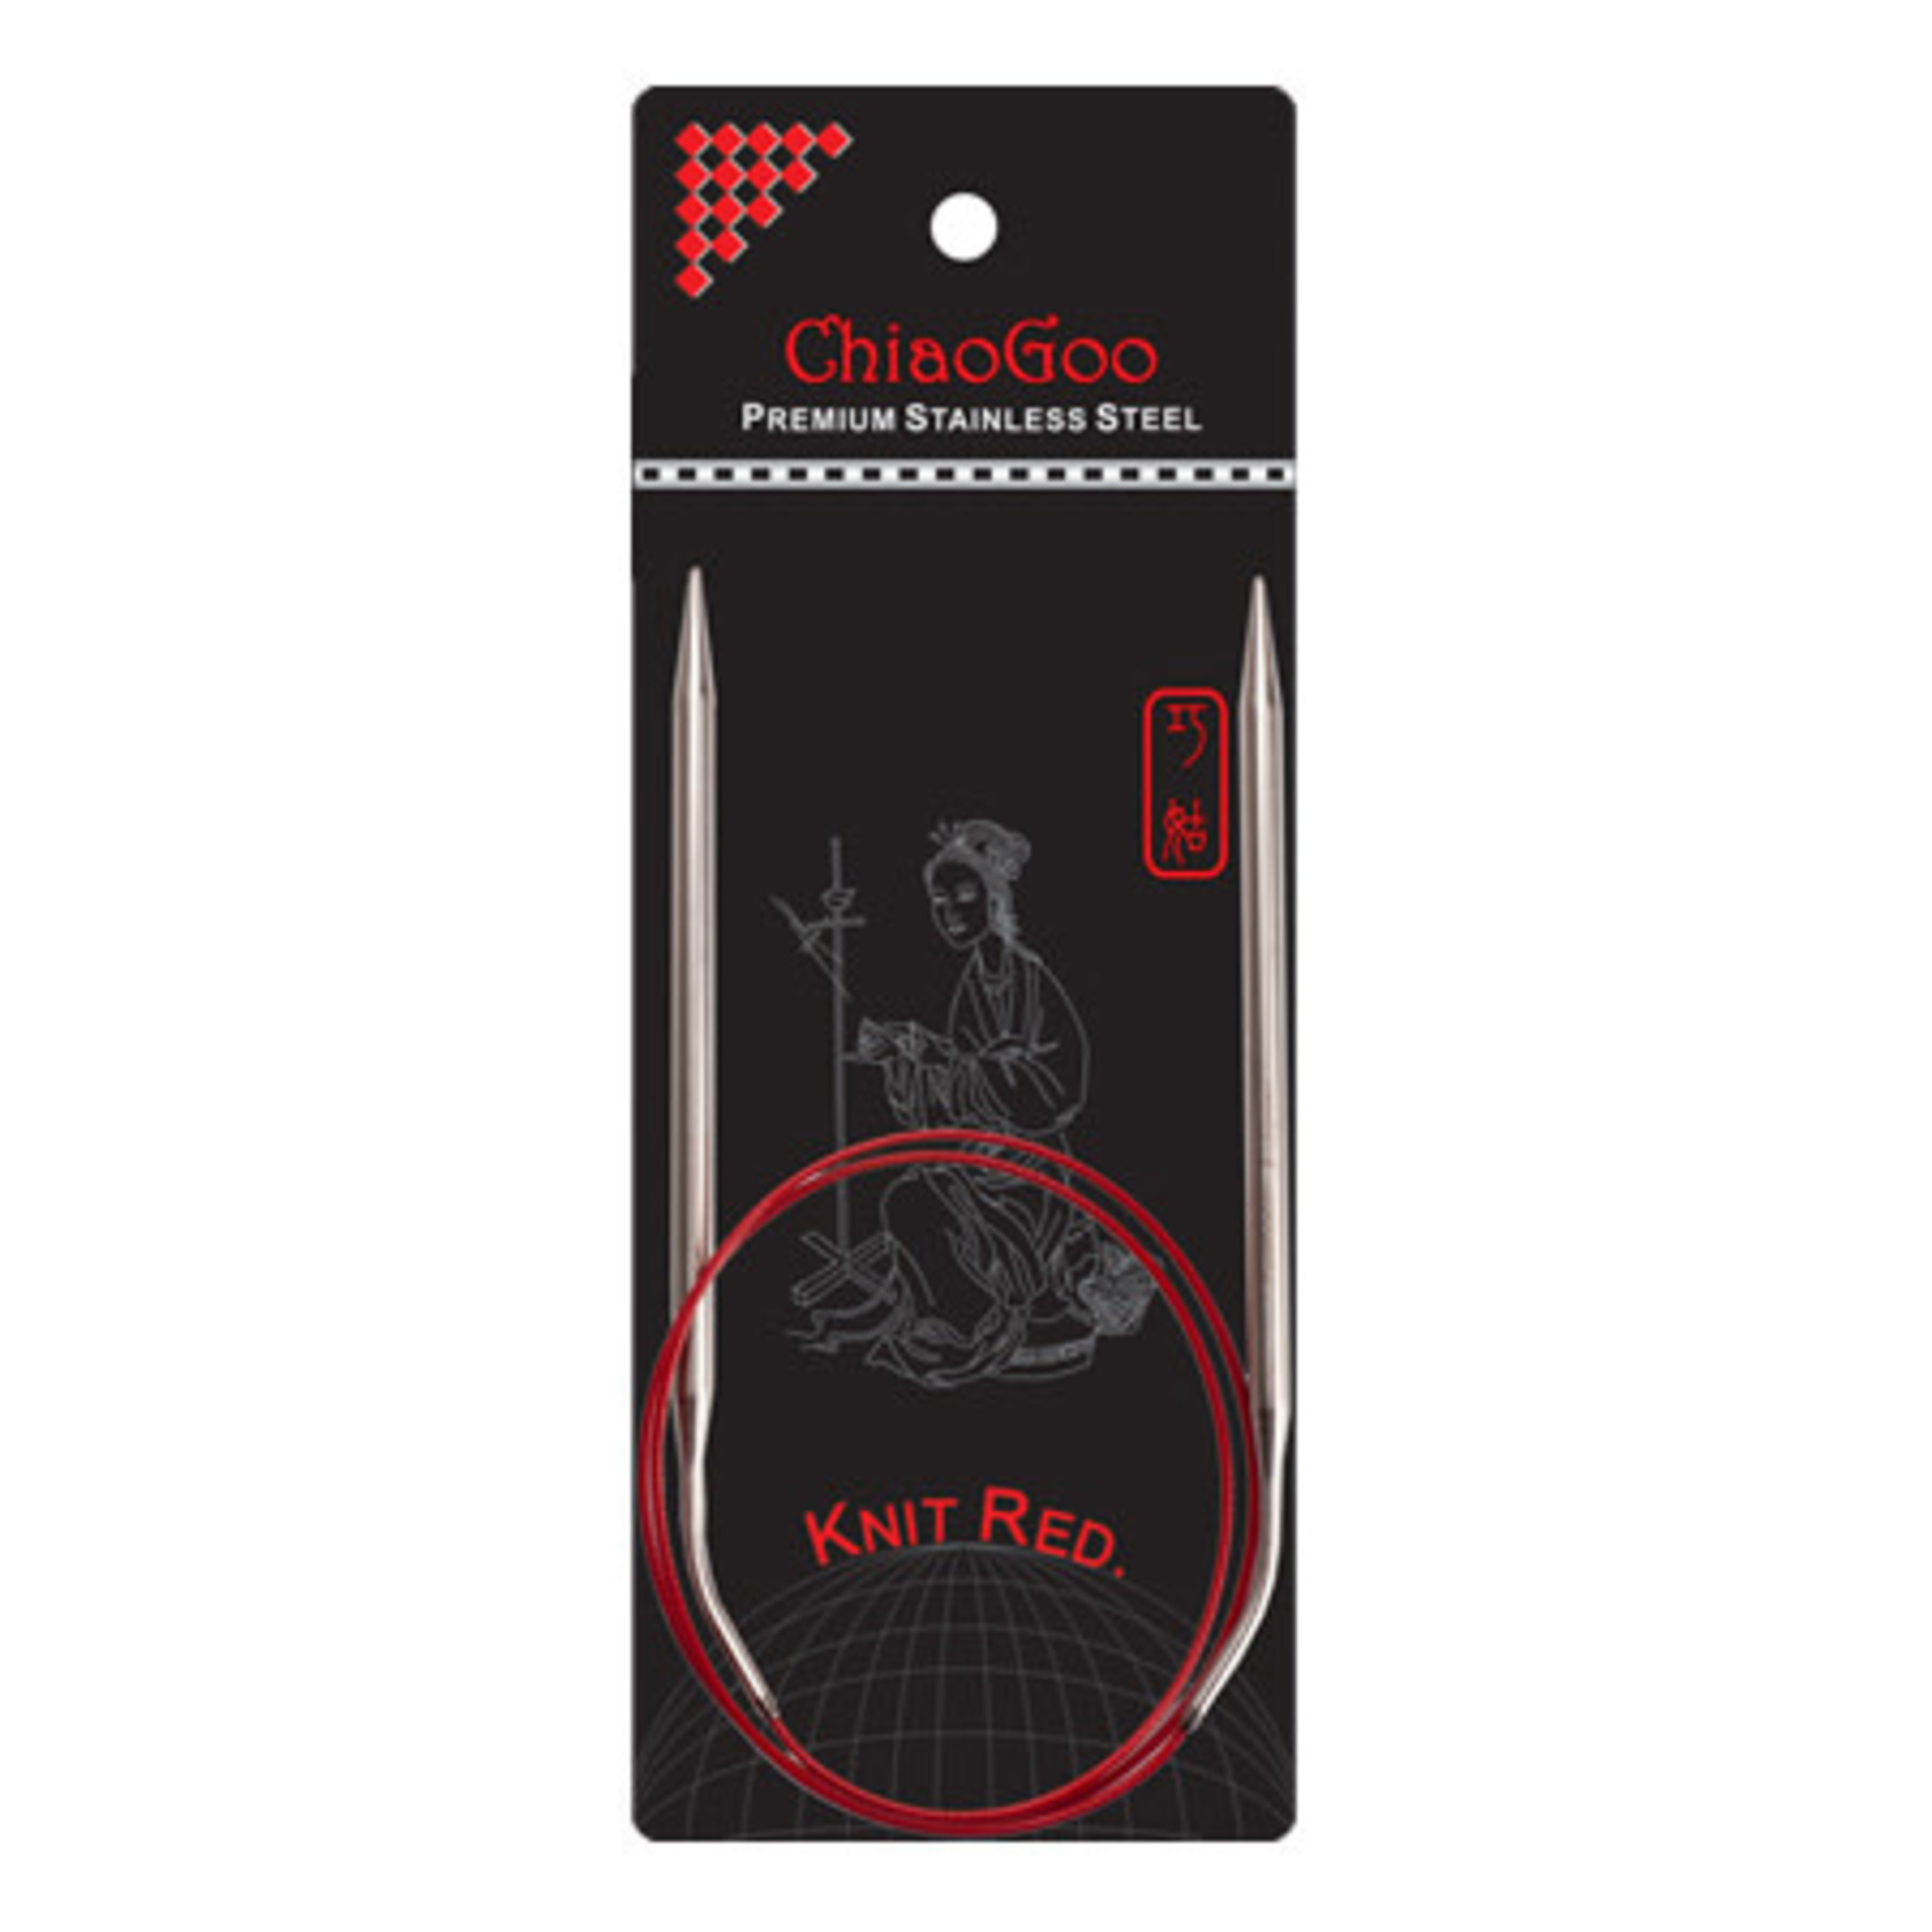 ChiaoGoo Knit Red Stainless Steel Fixed Circular Needle - Artisanthropy ...